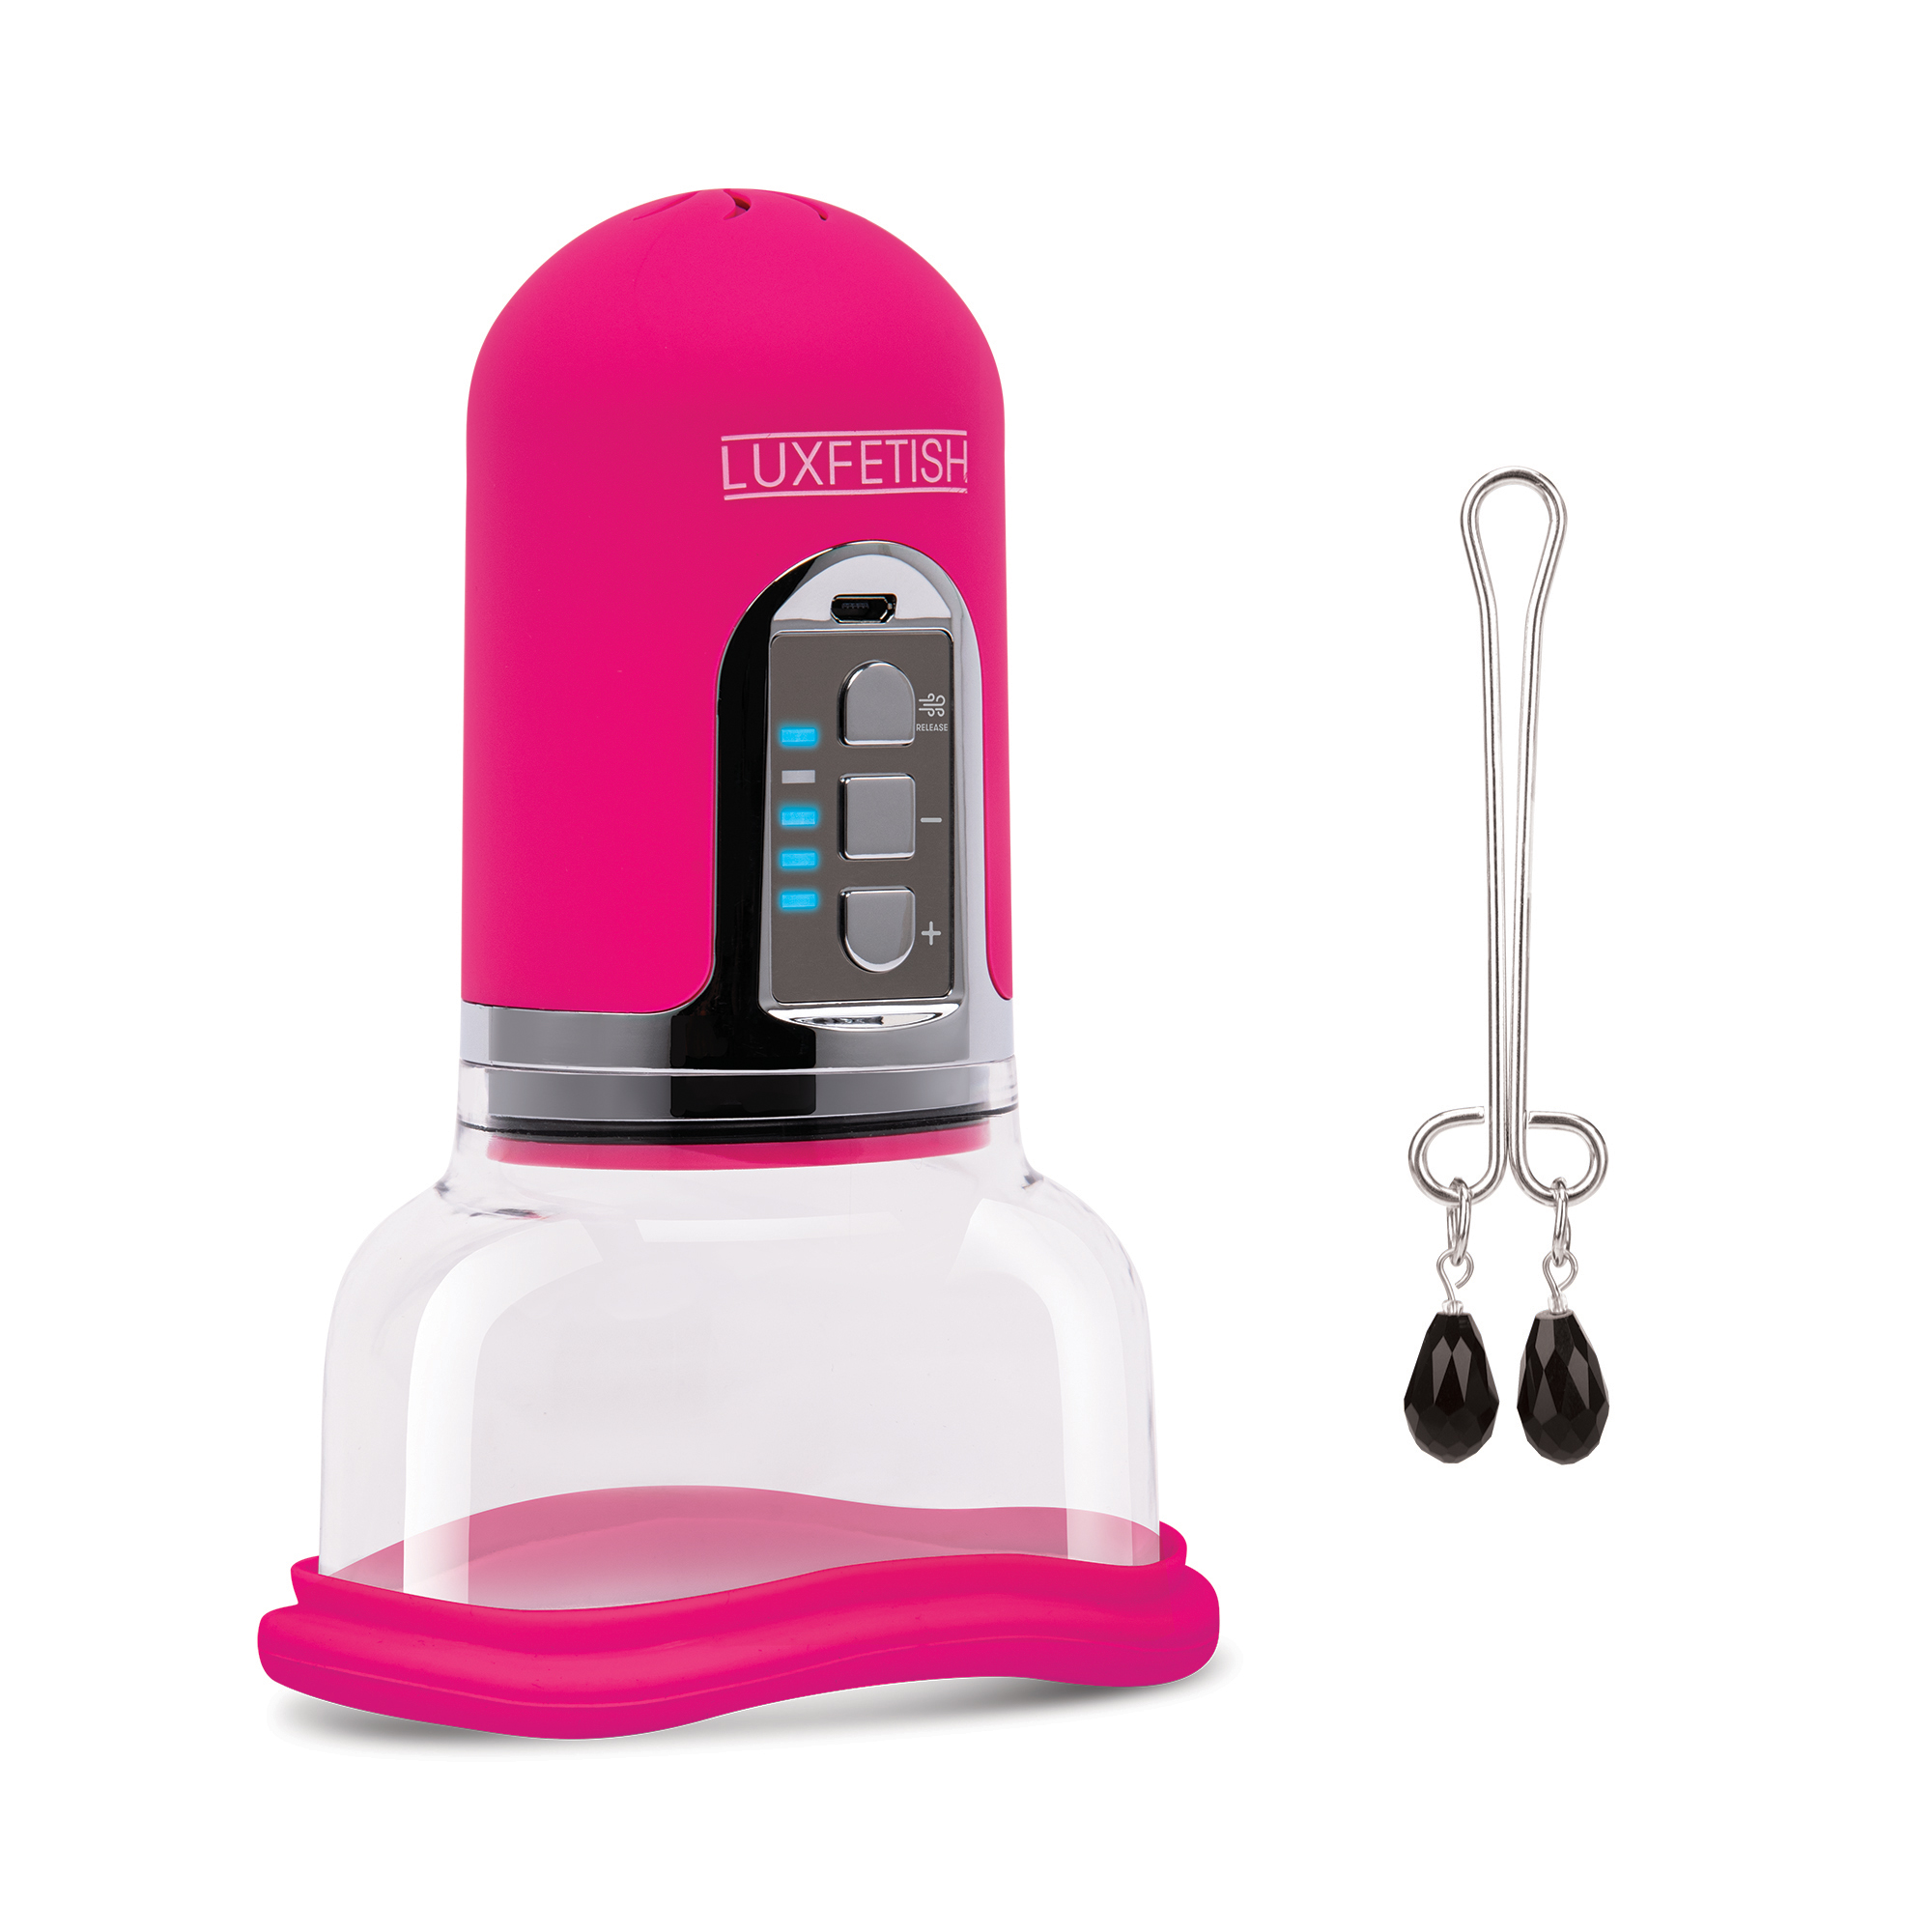 LUX FETISH Rechargeable 4-function Auto Pussy Pump With Clit Clamp